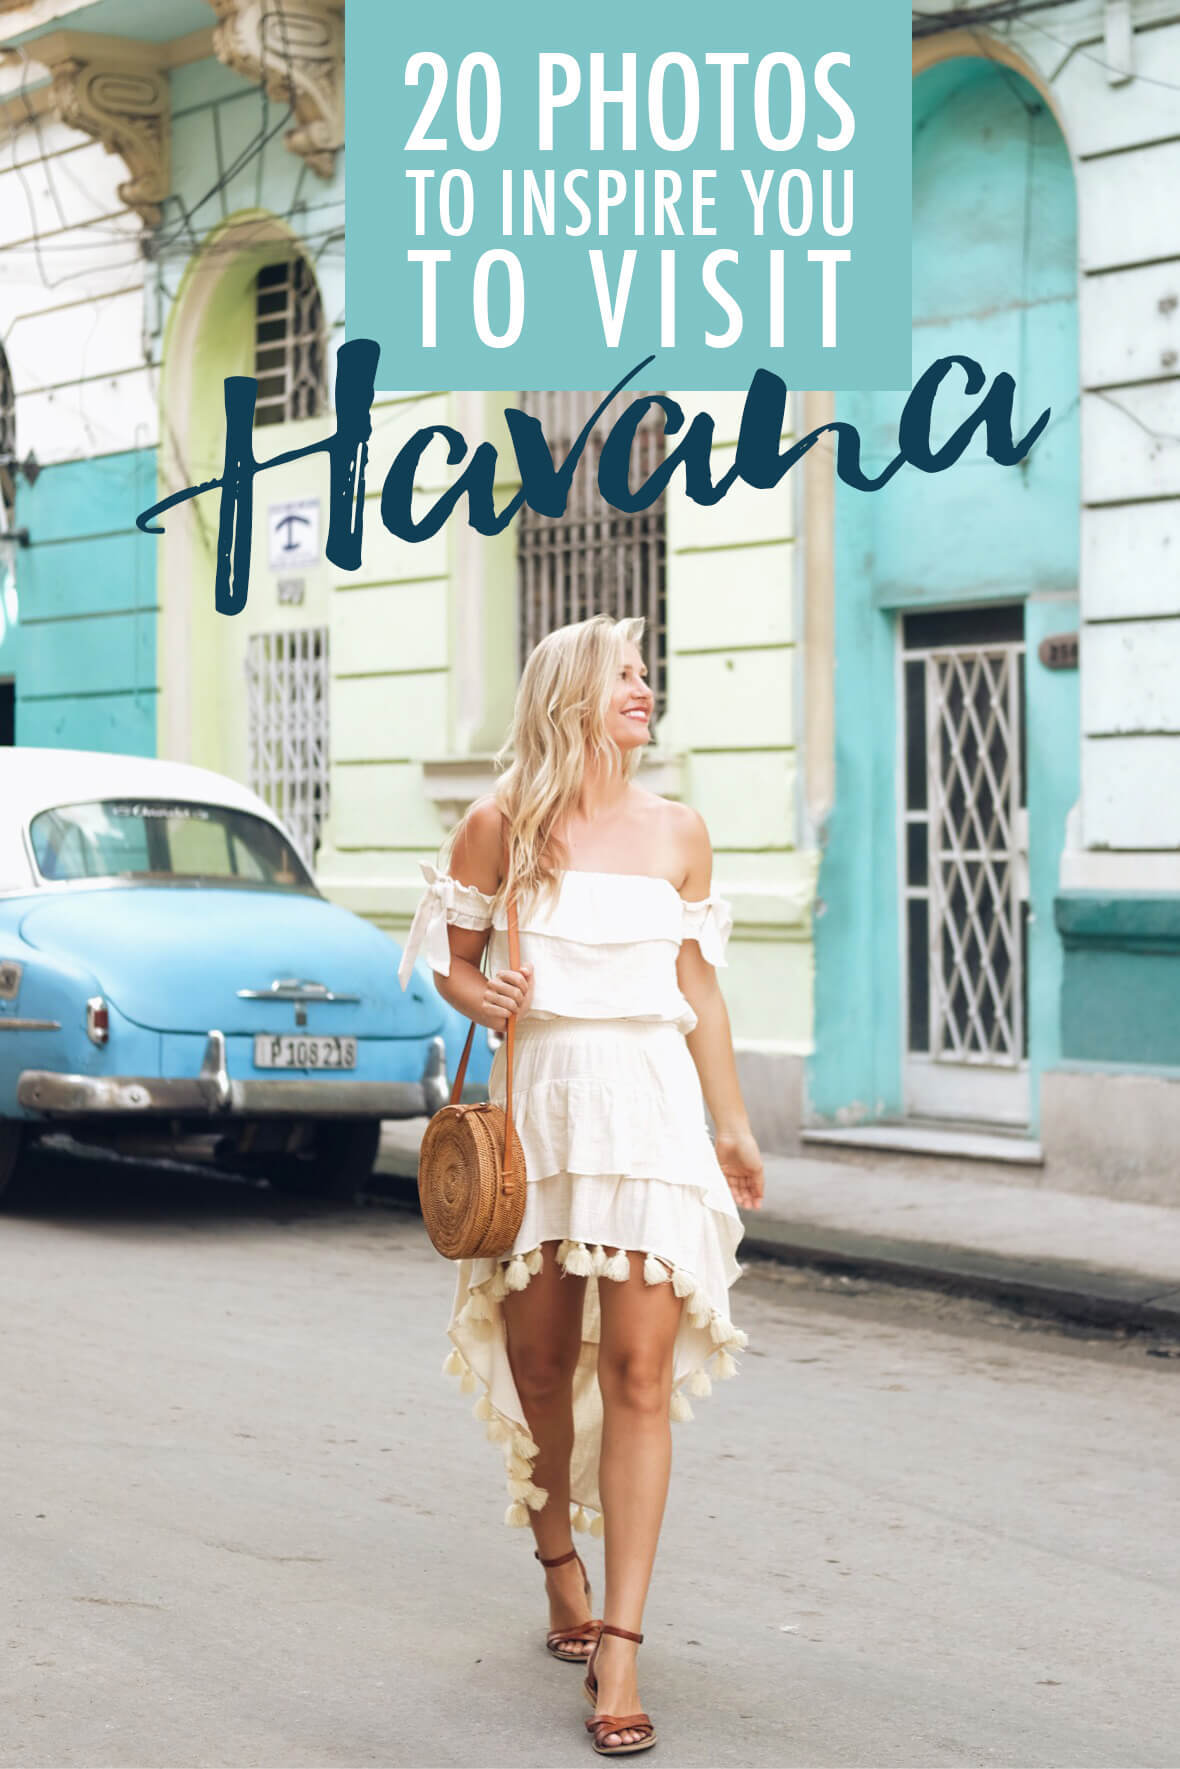 20 Photos to Inspire You to Visit Havana